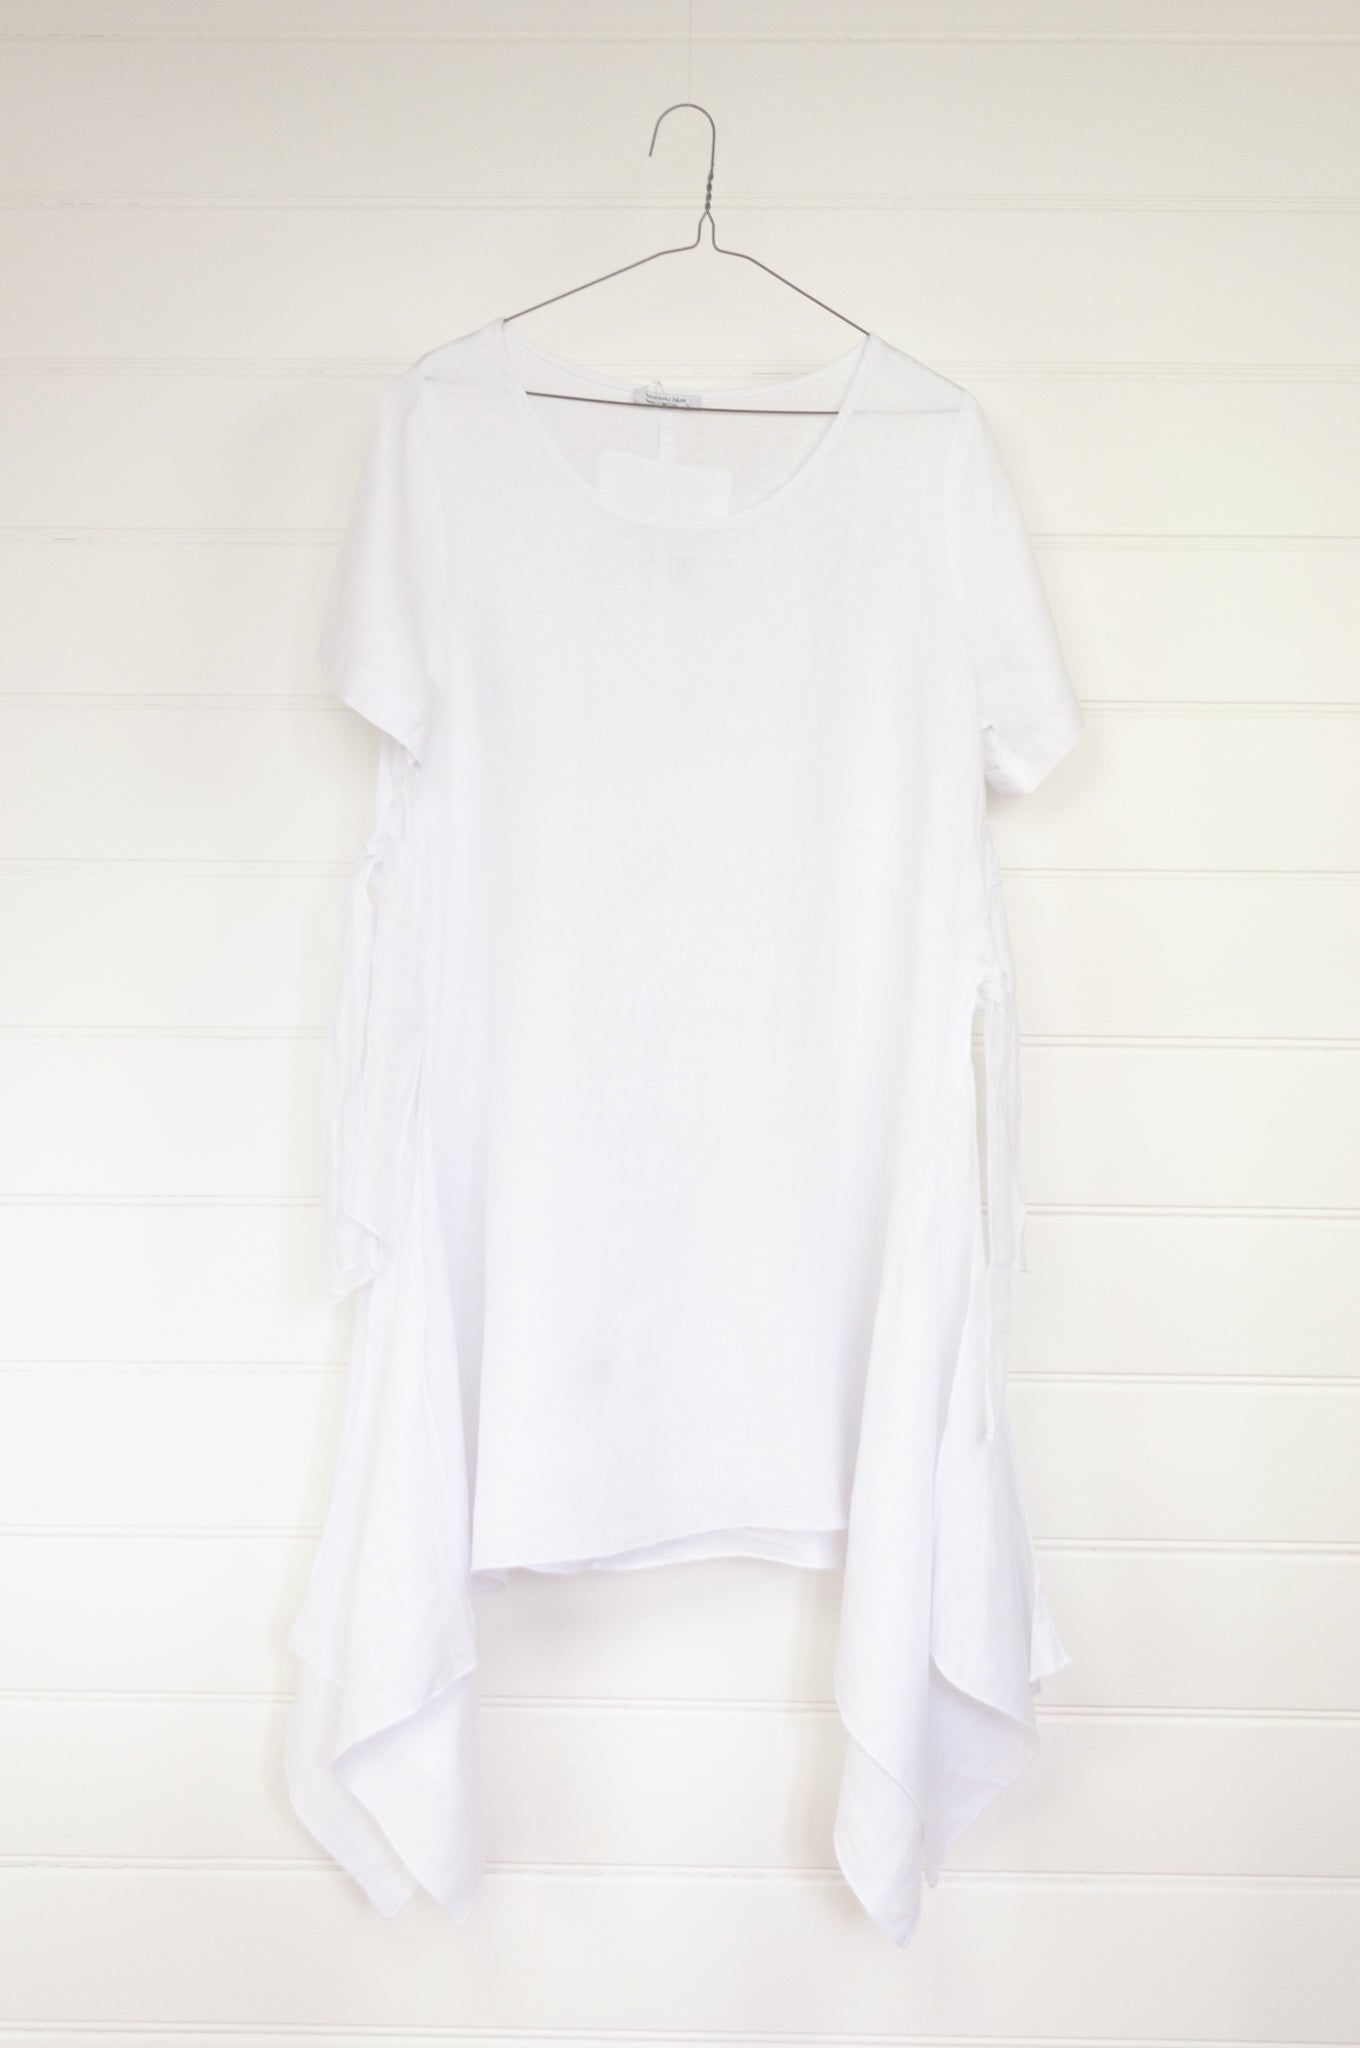 Banana Blue white linen tunic with side ties.